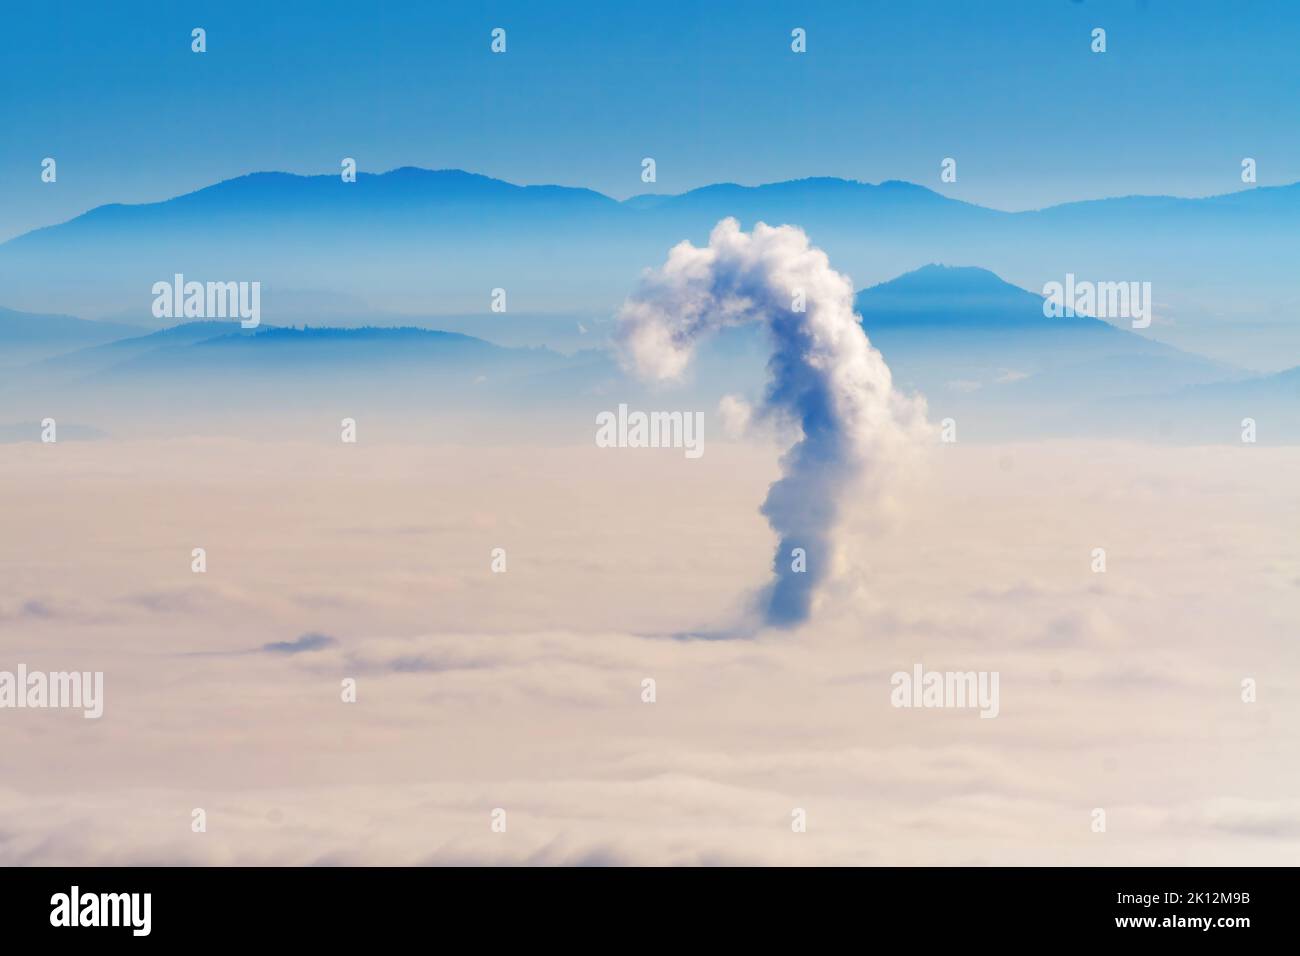 Foggy landscape with single plume of smoke from chimney above the city, hills visible in background. Environment, climate change and energy concepts Stock Photo